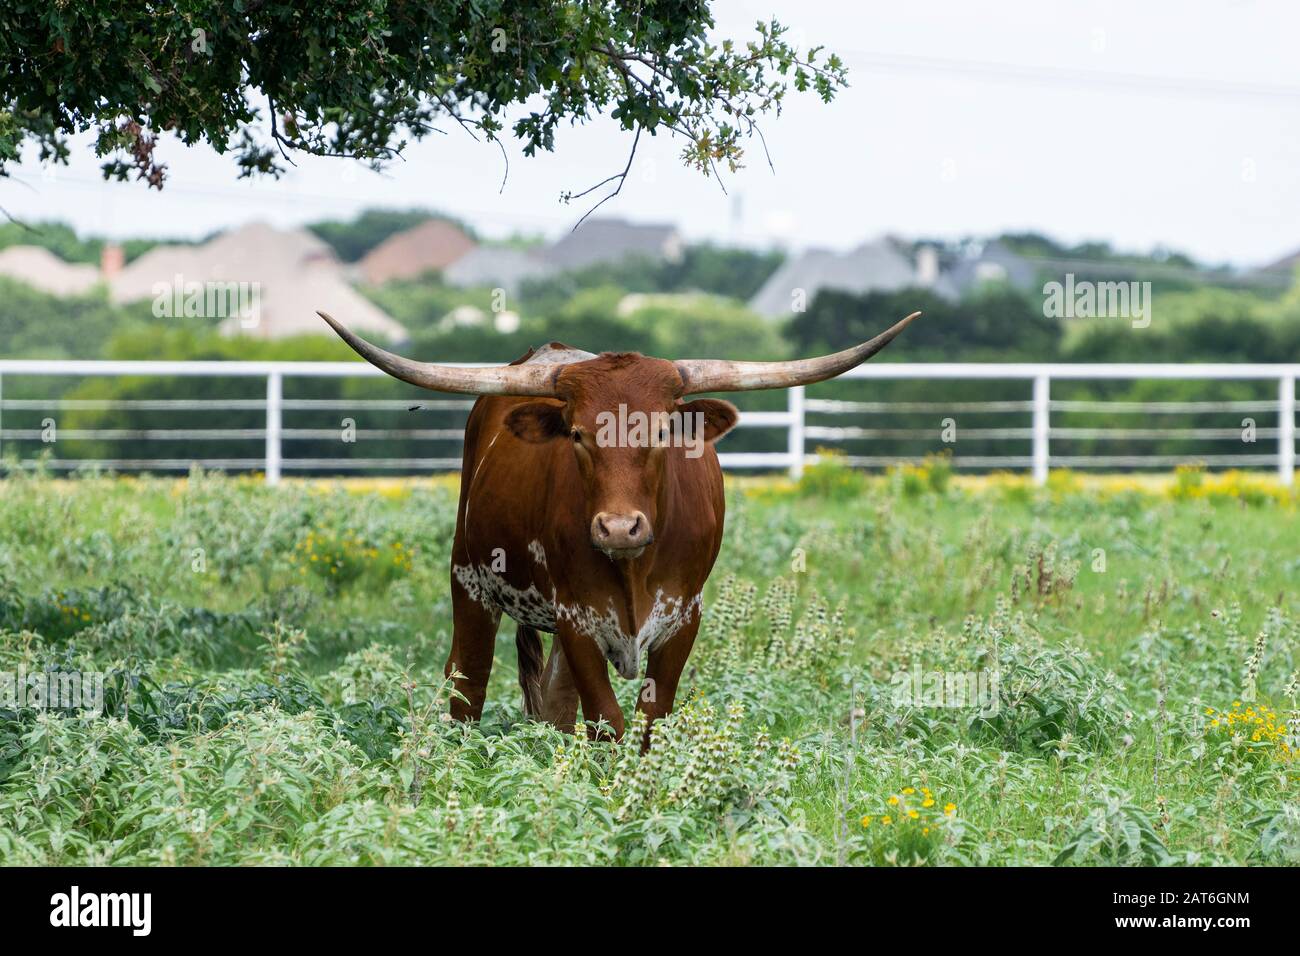 Brown Longhorn bull with a white speckled belly standing under a tree in a ranch meadow with a white metal fence separating the filed from the houses Stock Photo